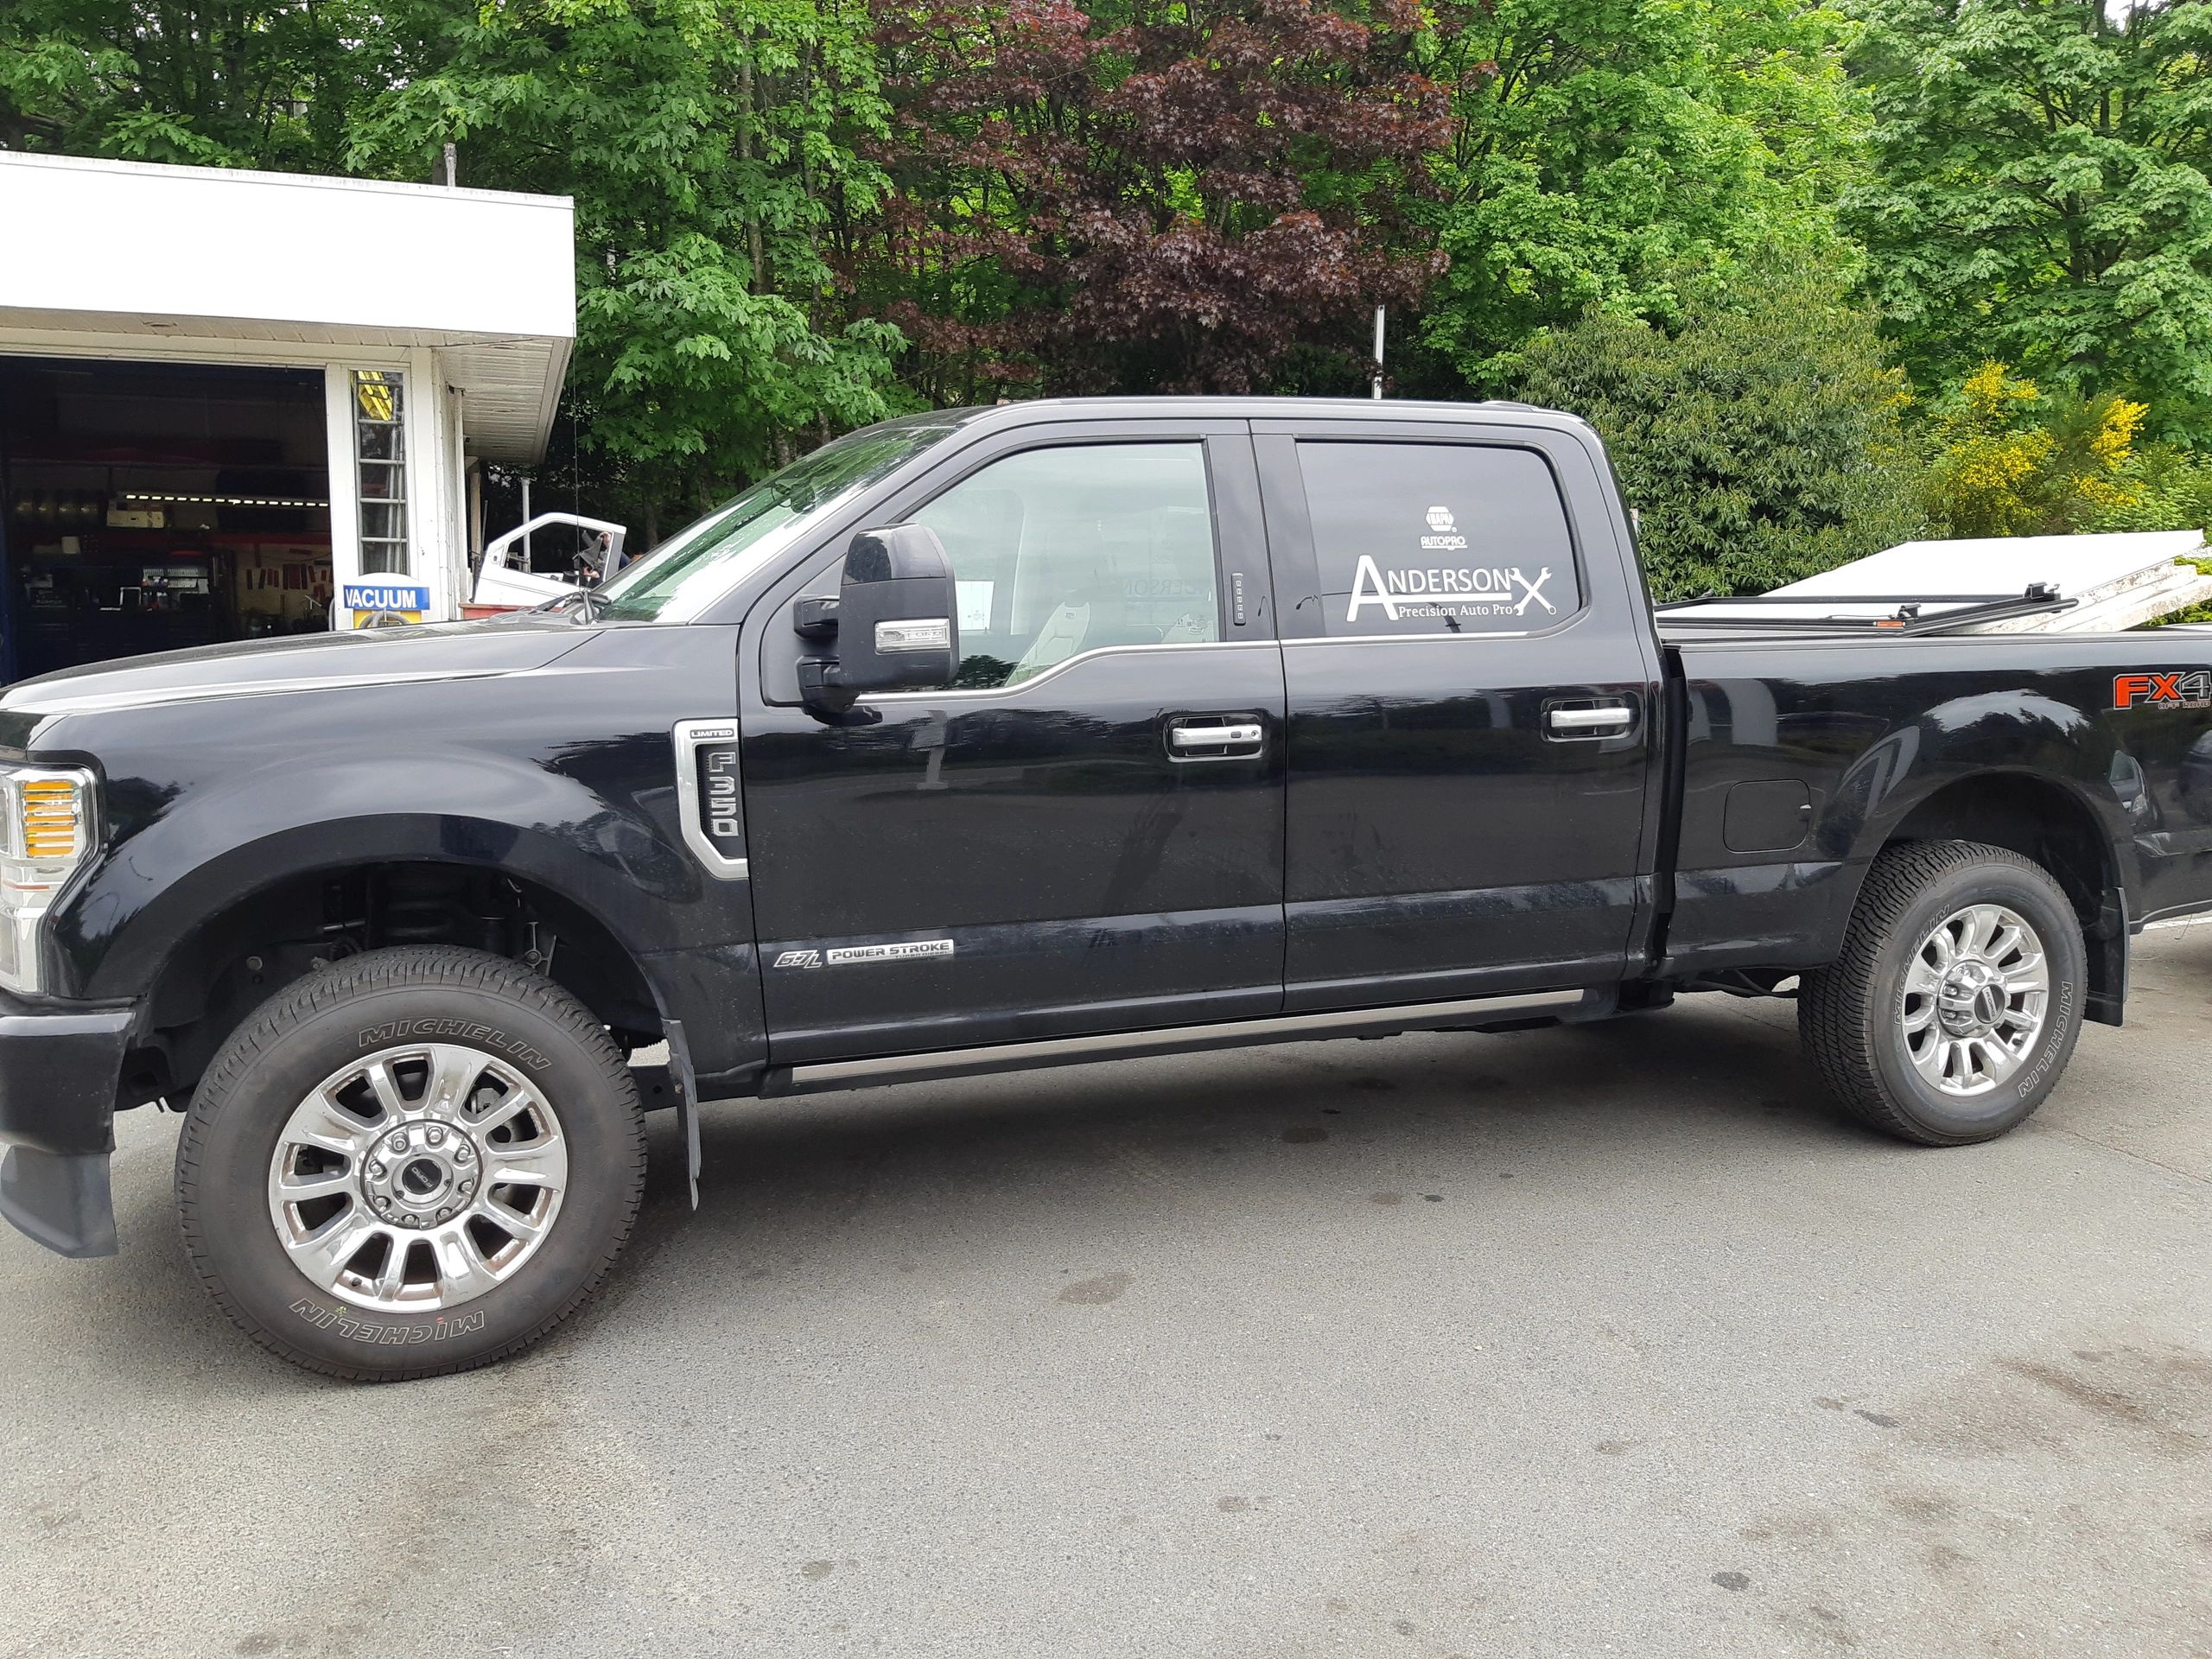 Ford F350, fleet vehicle, shop truck.  Car and truck repairs on all makes and models